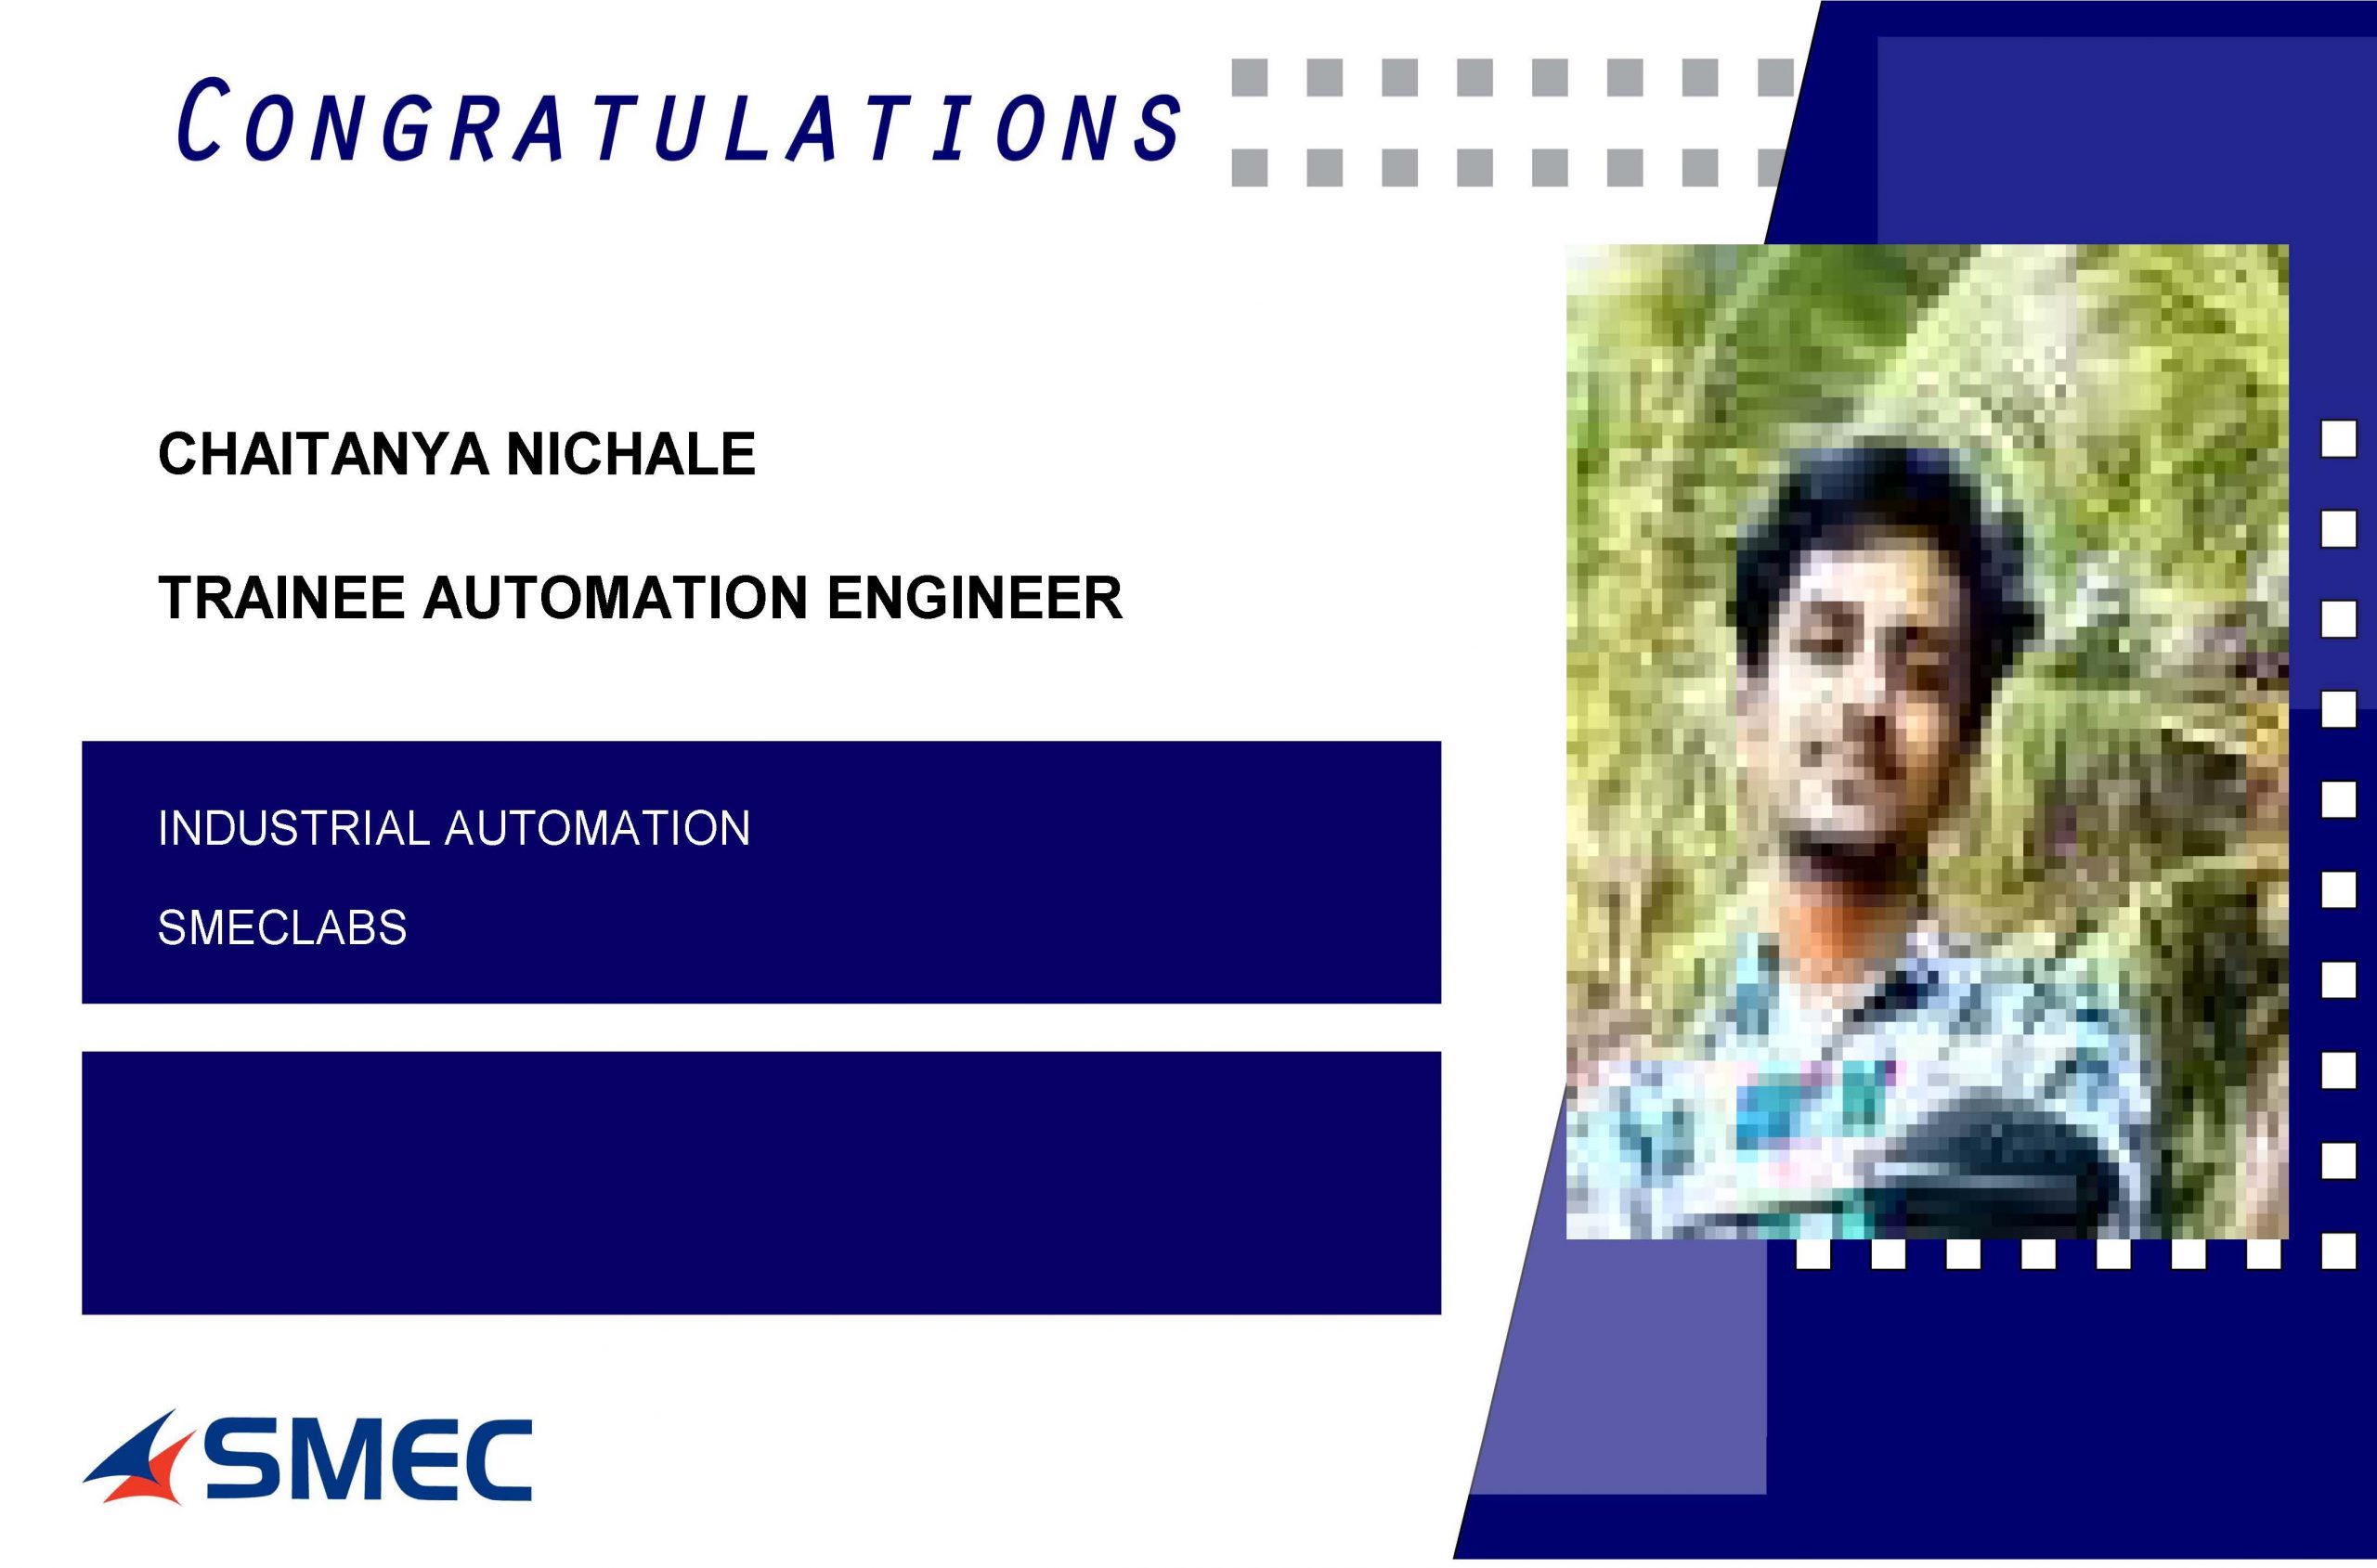 Chaitanya Nichale Placed Successfully as Trainee Automation Engineer